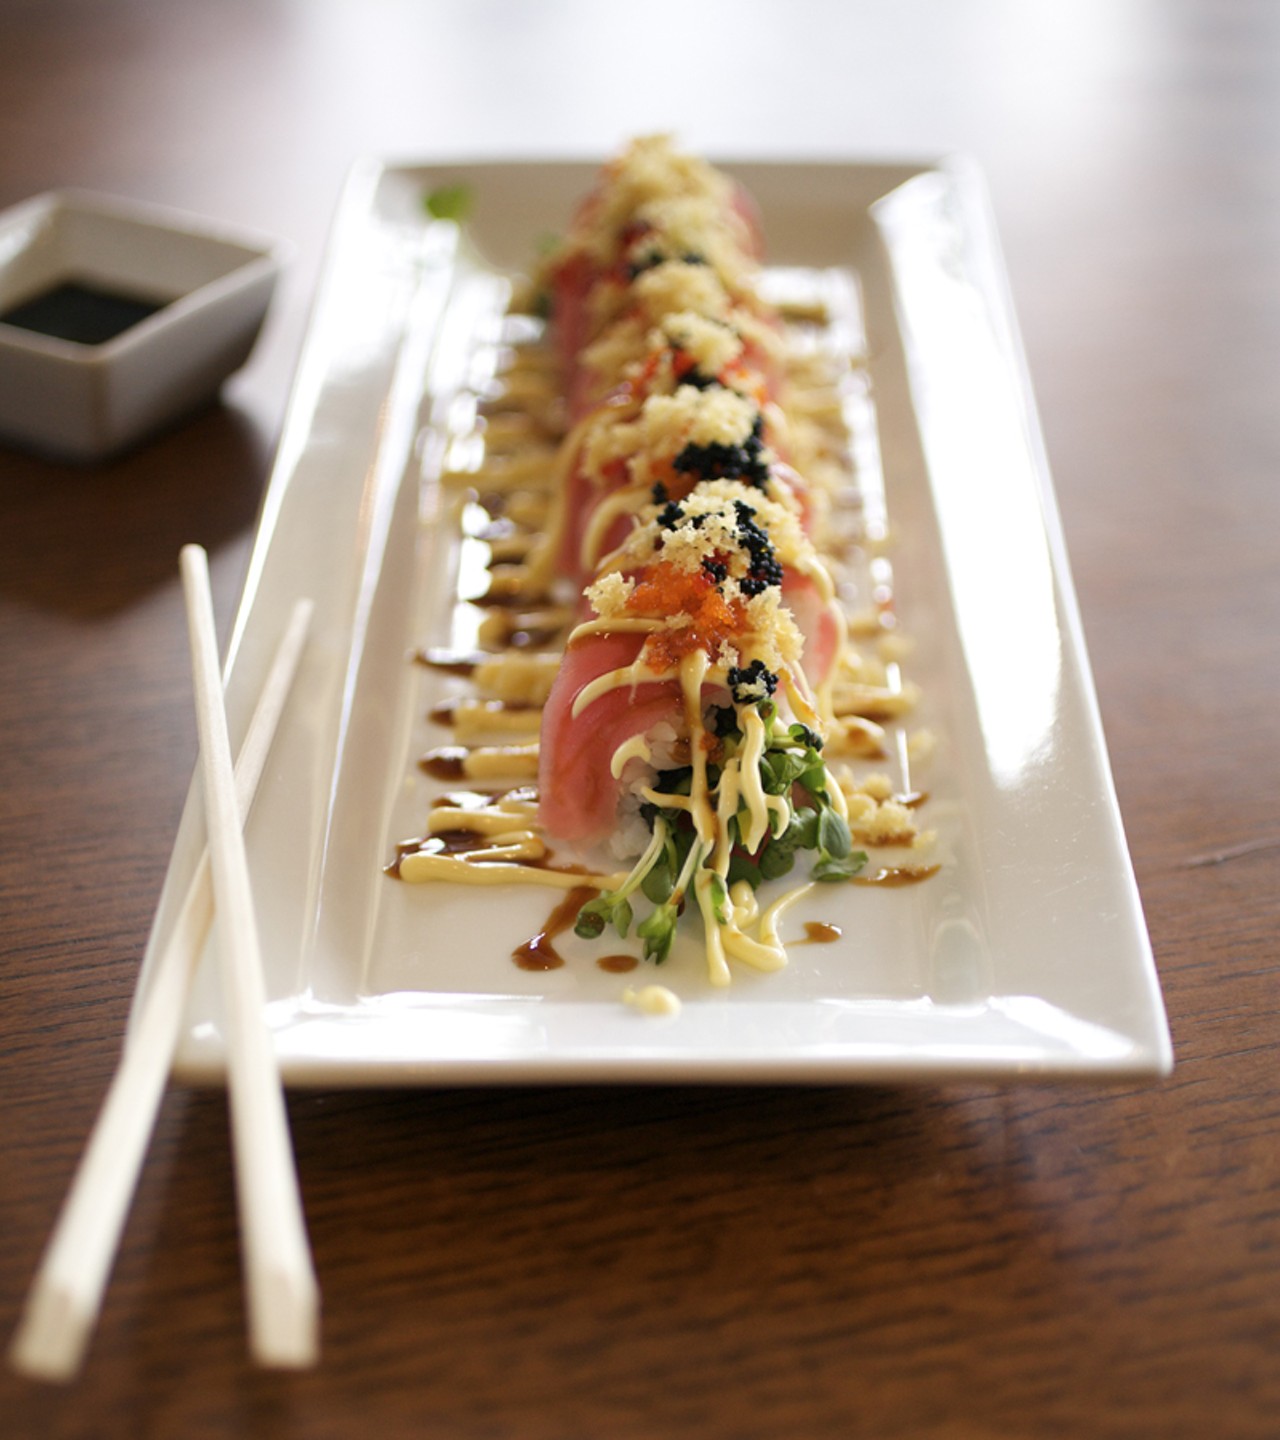 The Red Dragon Roll is a spicy tuna roll topped with tuna, smelt eggs and teriyaki sauce.